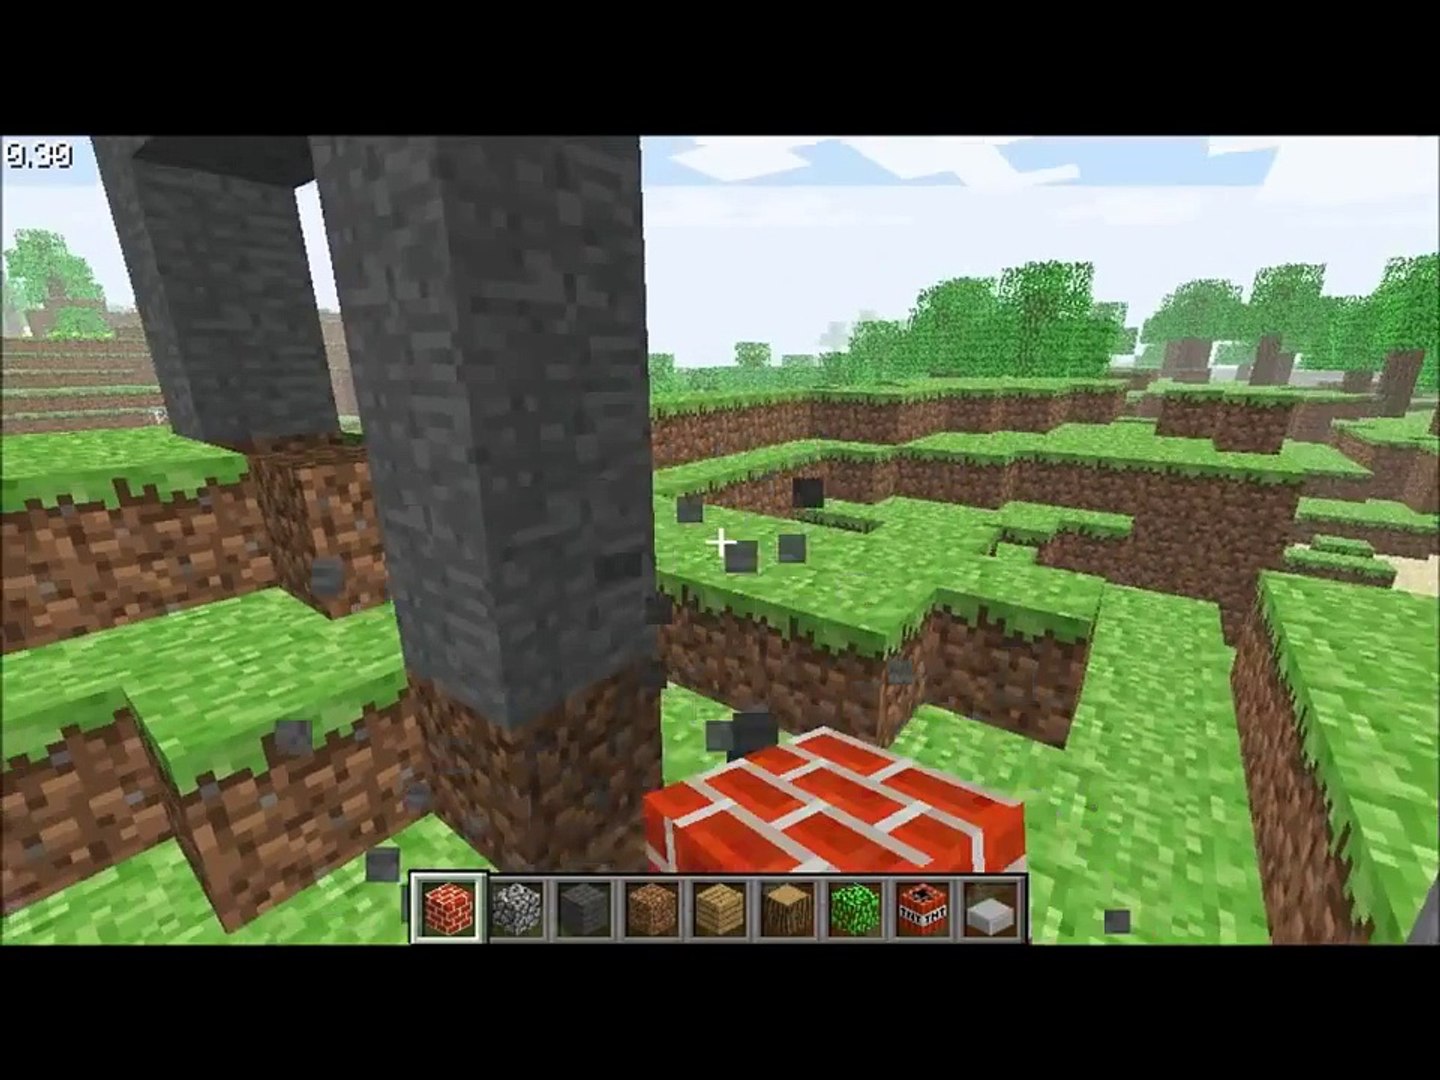 Can you sex in minecraft in Manaus